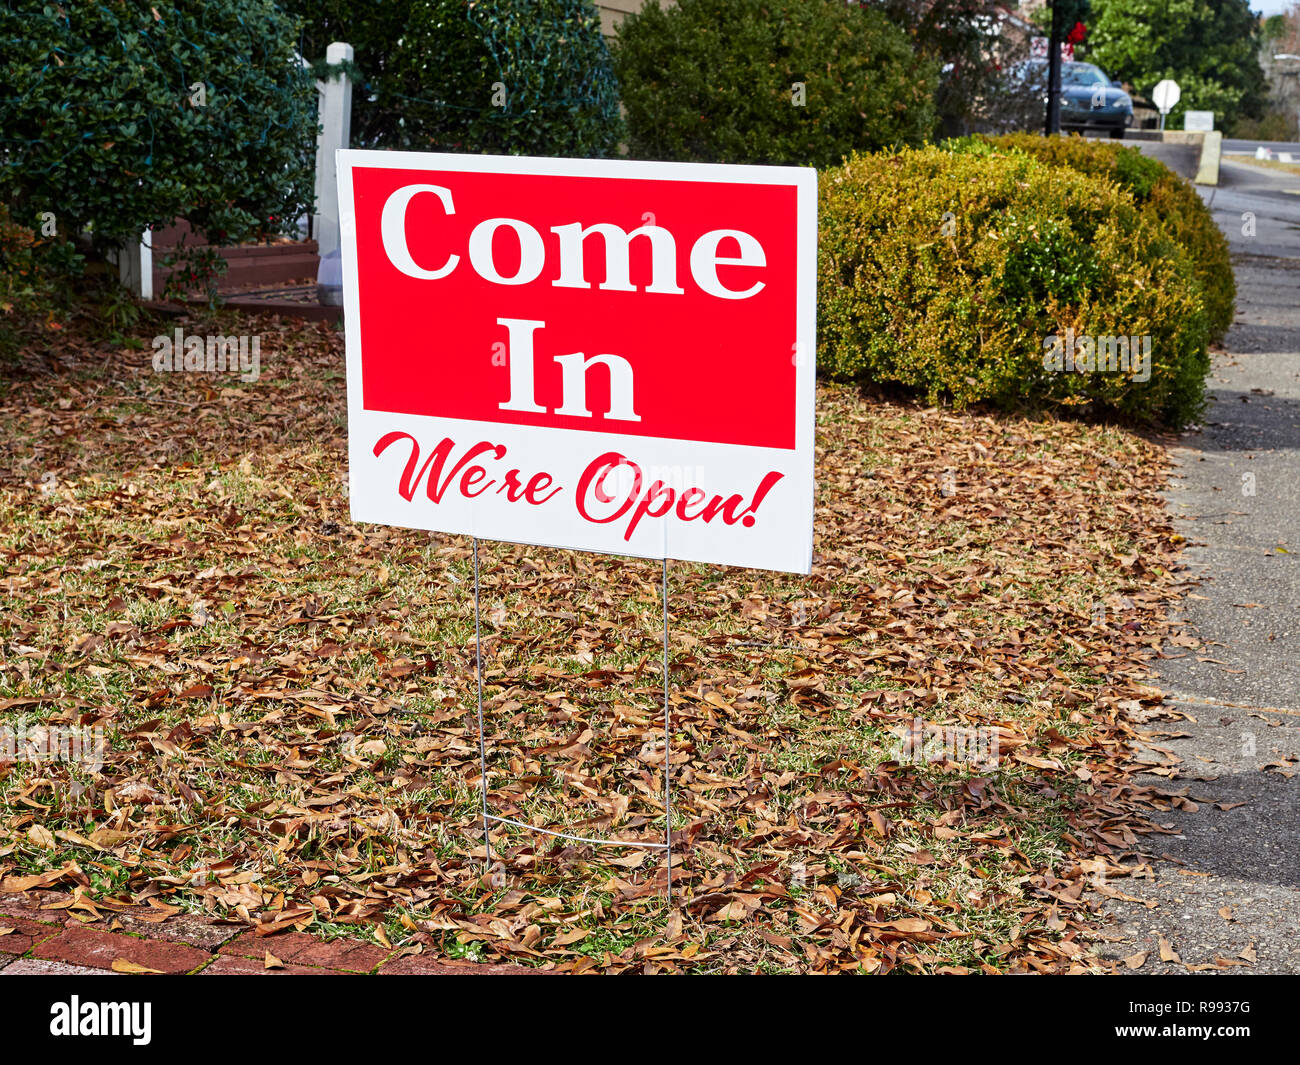 Small yard or snipe sign for a business stating Come In, We're Open, found in Warm Springs Georgia, USA. Stock Photo